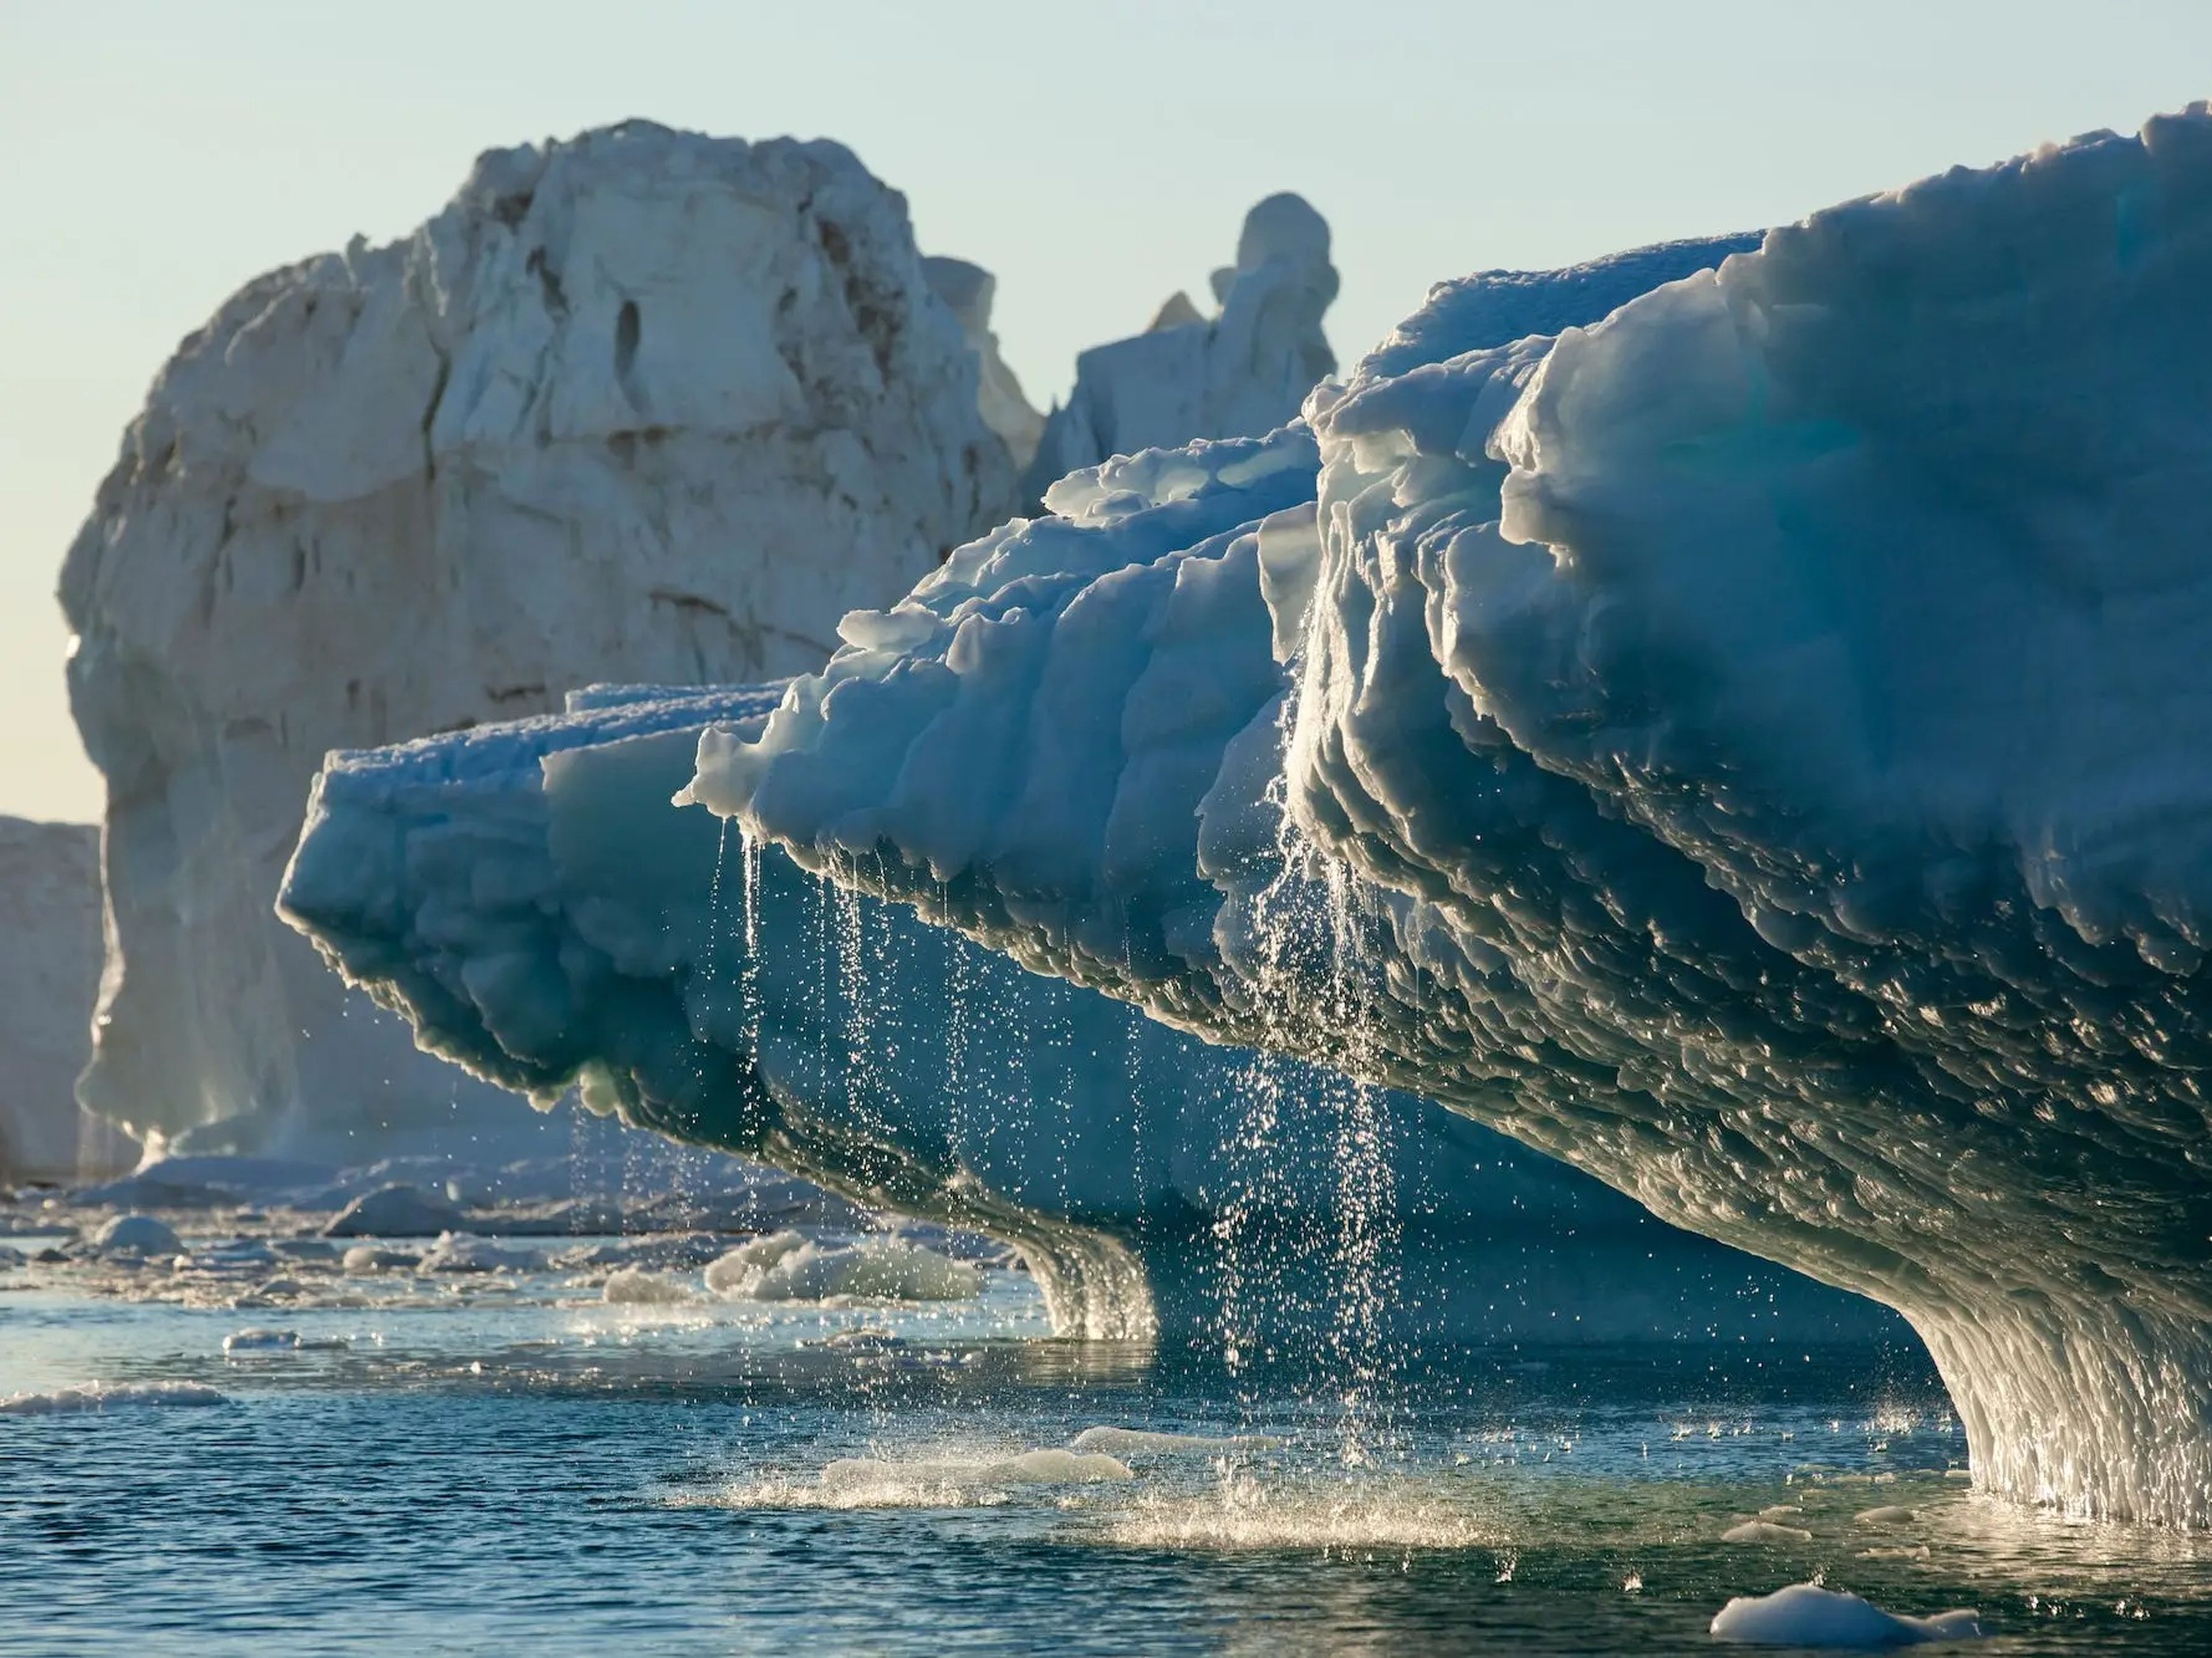 Water is seen streaming off of icebergs in in Disko Bay, Greenland, that were recently calved from the Ilulissat (Jakobshavn) Glacier